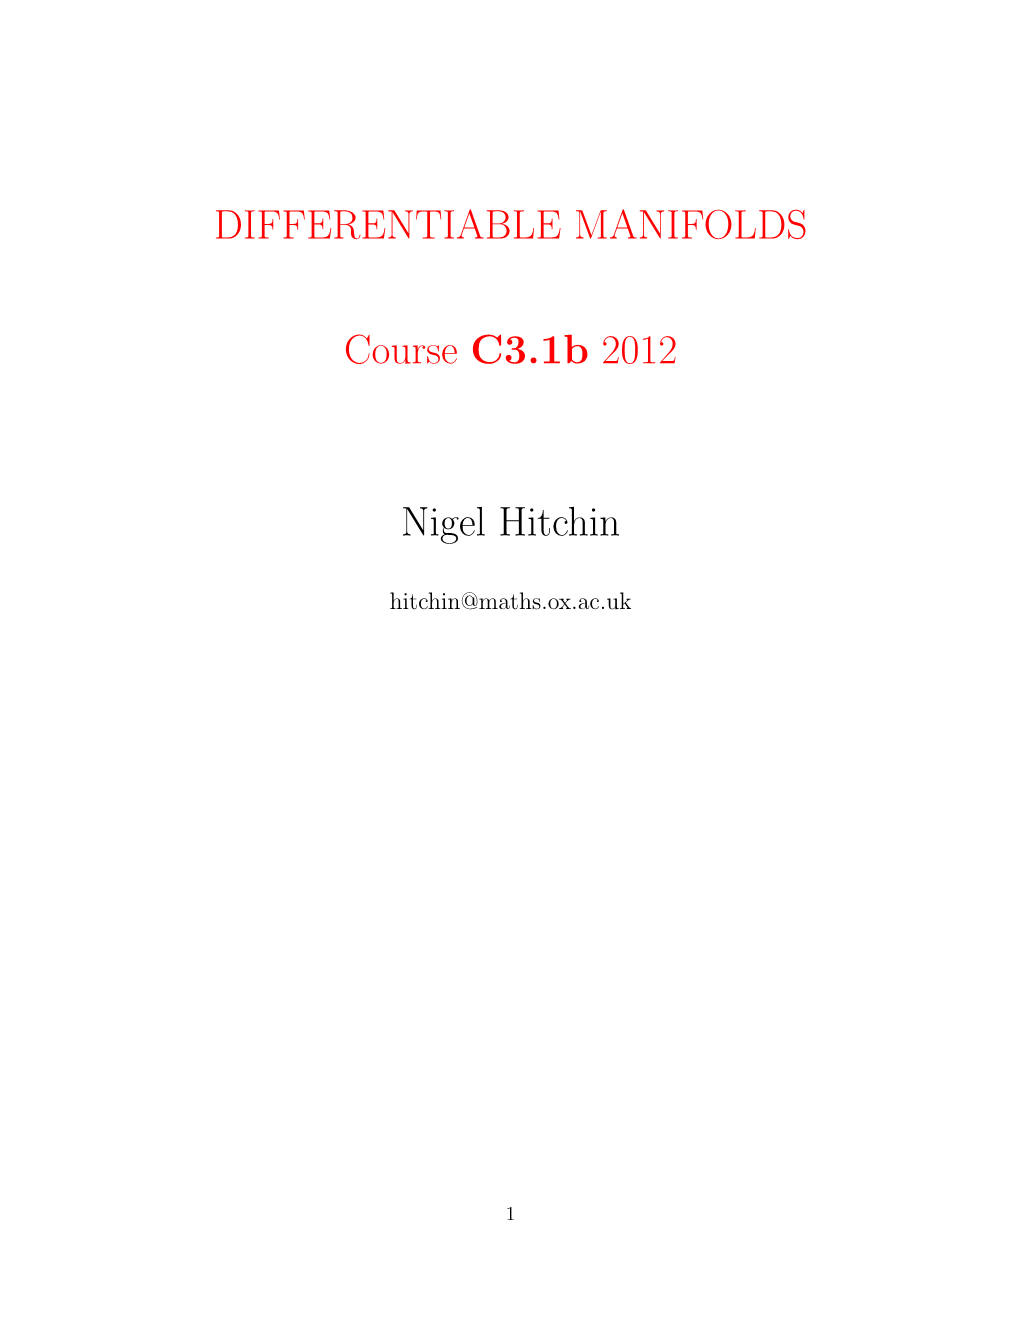 DIFFERENTIABLE MANIFOLDS Course C3.1B 2012 Nigel Hitchin